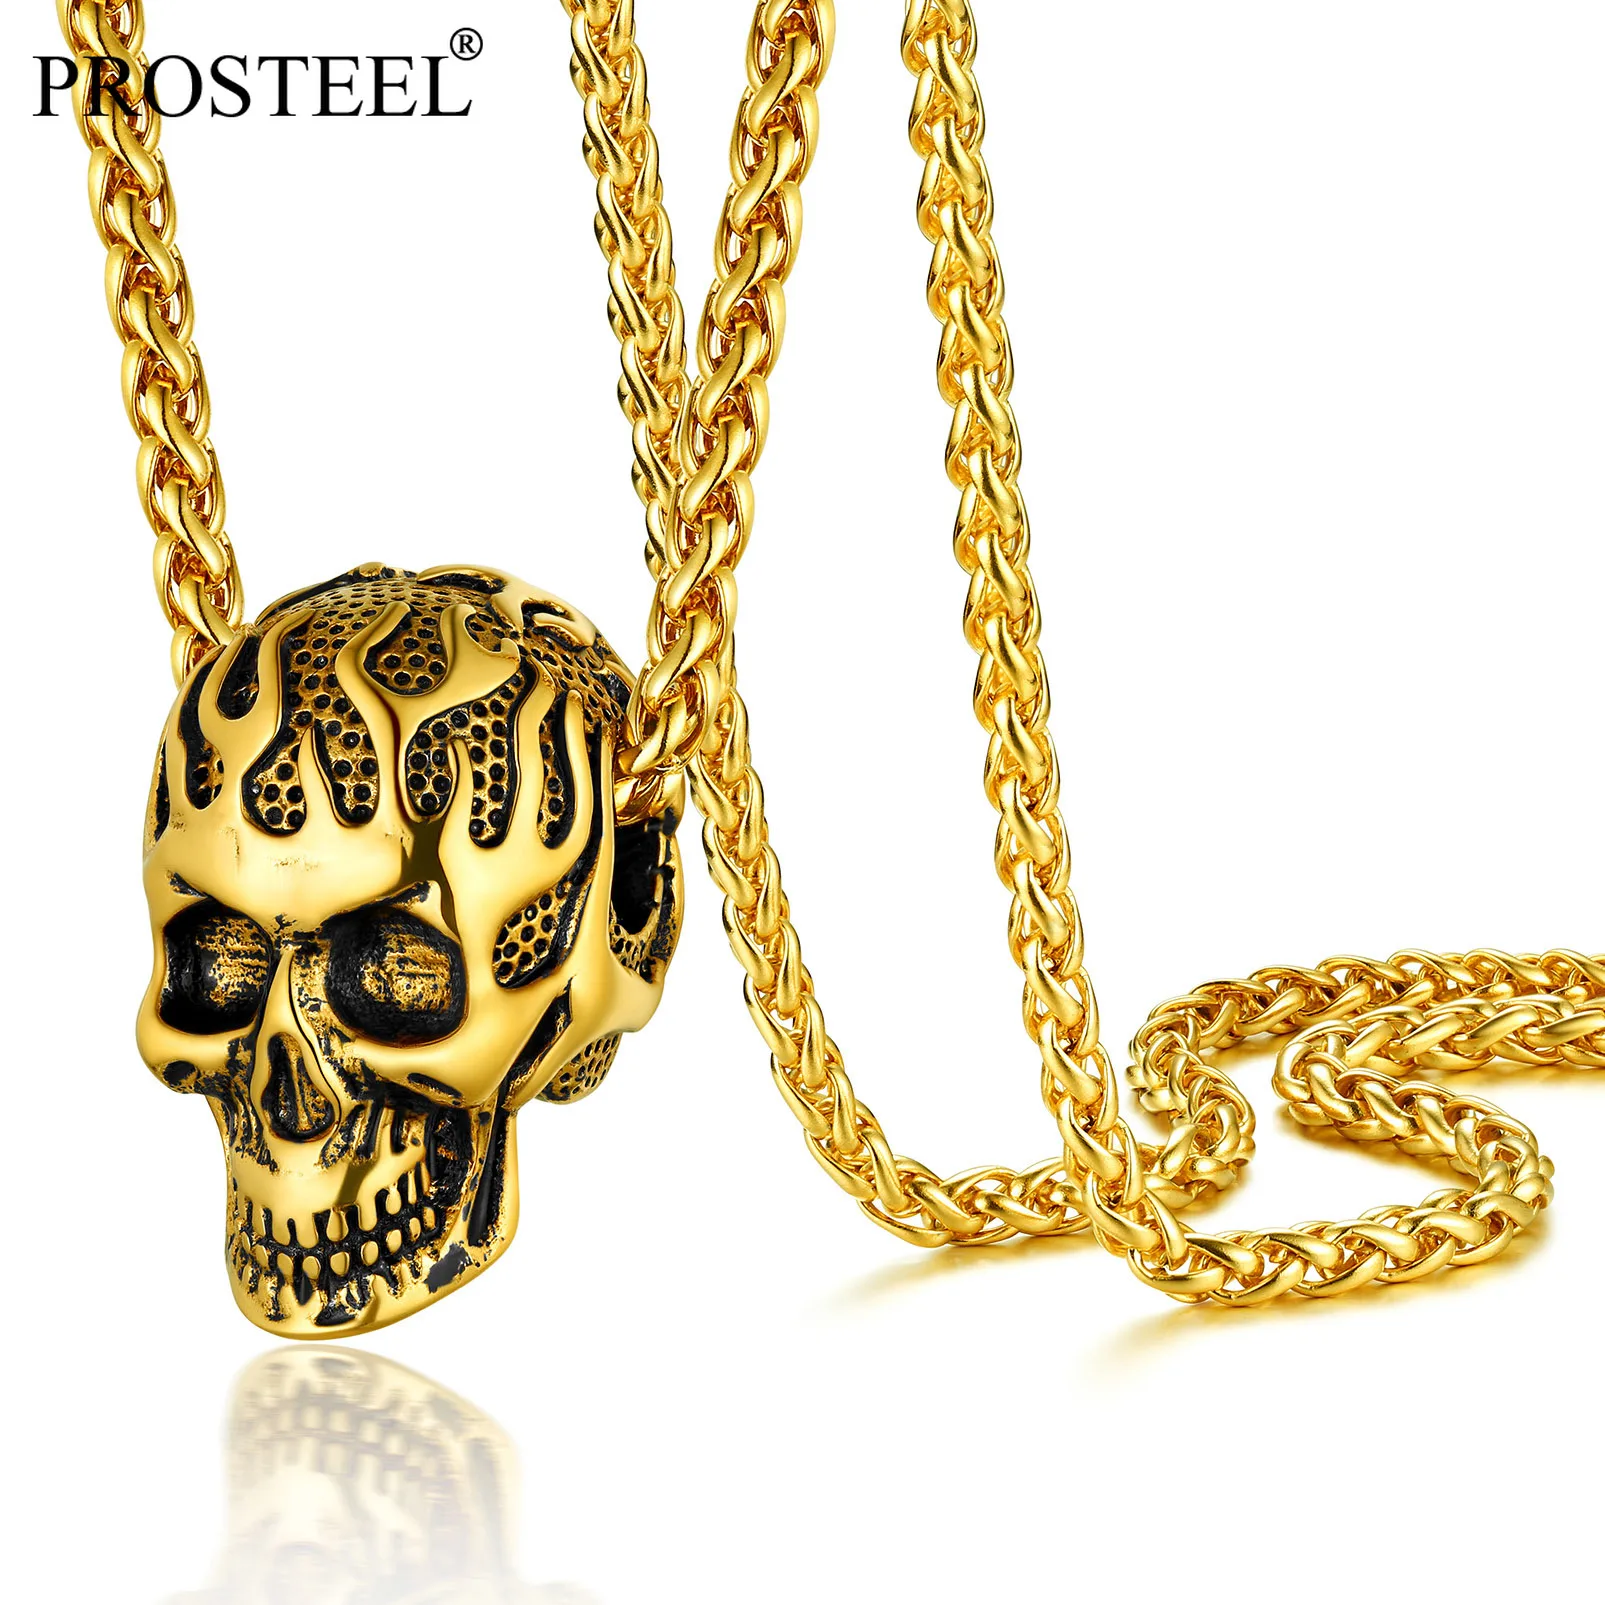 

PROSTEEL Halloween Flame Skull Necklace Cool Chain Pendant Gothic Gifts for Men Teen Boys 18K Gold/Black/Silver Colors PSP40030